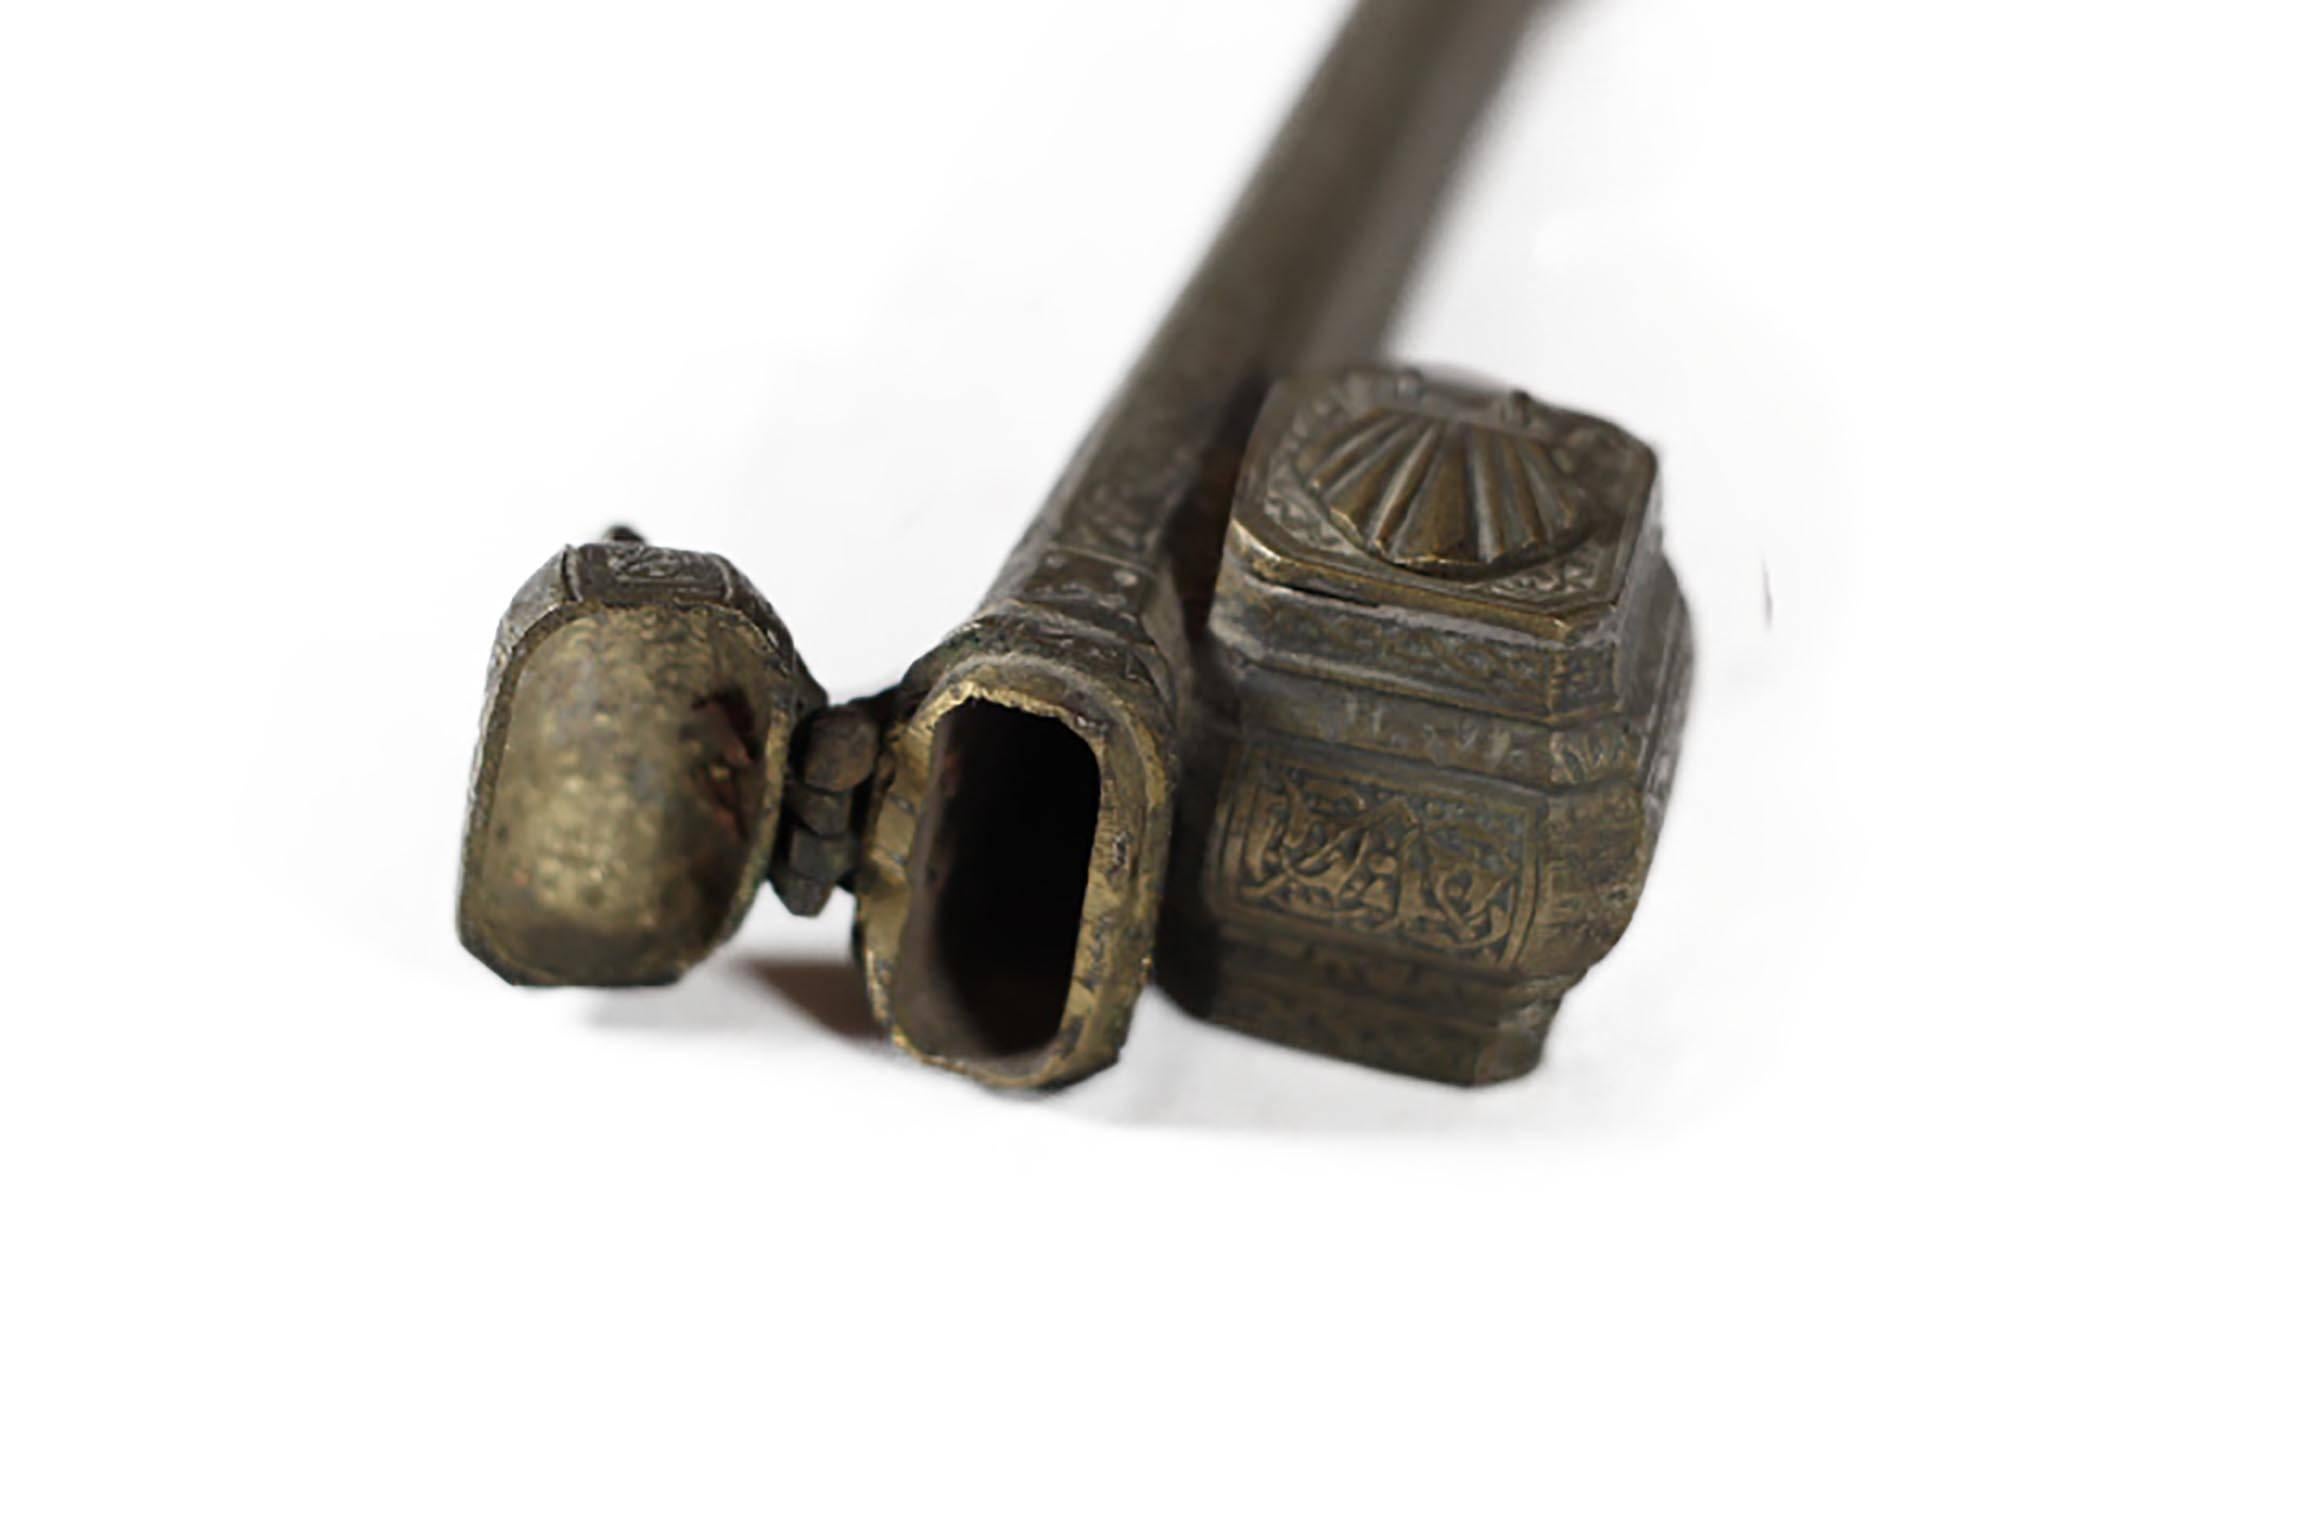 Highly decorated brass scribe box used to hold quills in the main chamber and ink in the side chamber. Both chambers have lids that open.8.5